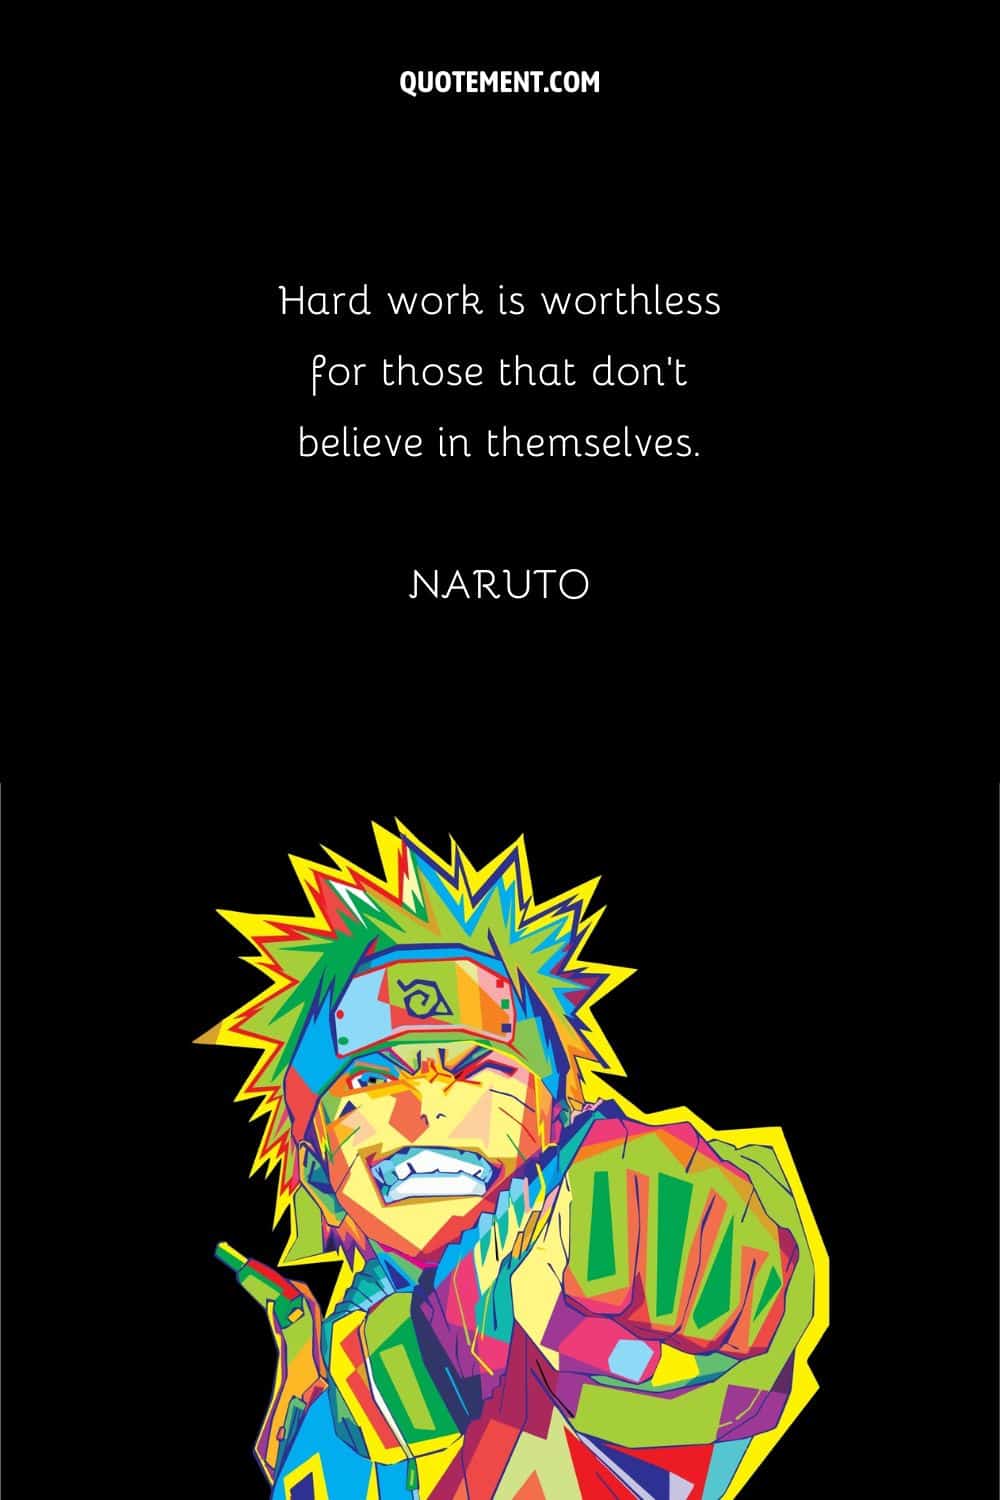 “Hard work is worthless for those that don’t believe in themselves.” — Naruto